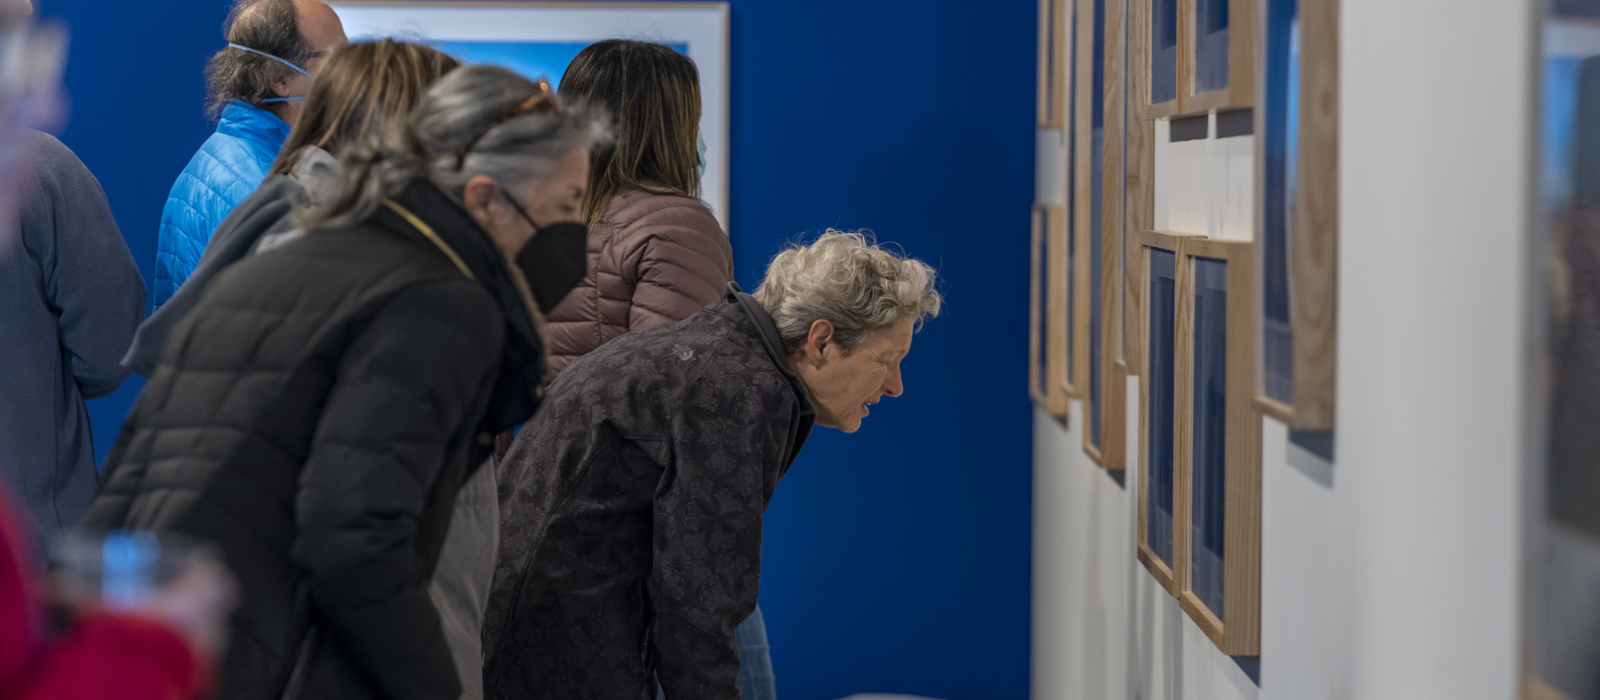 A woman looks closely at a wall full of photographs by Ashley Hunt.